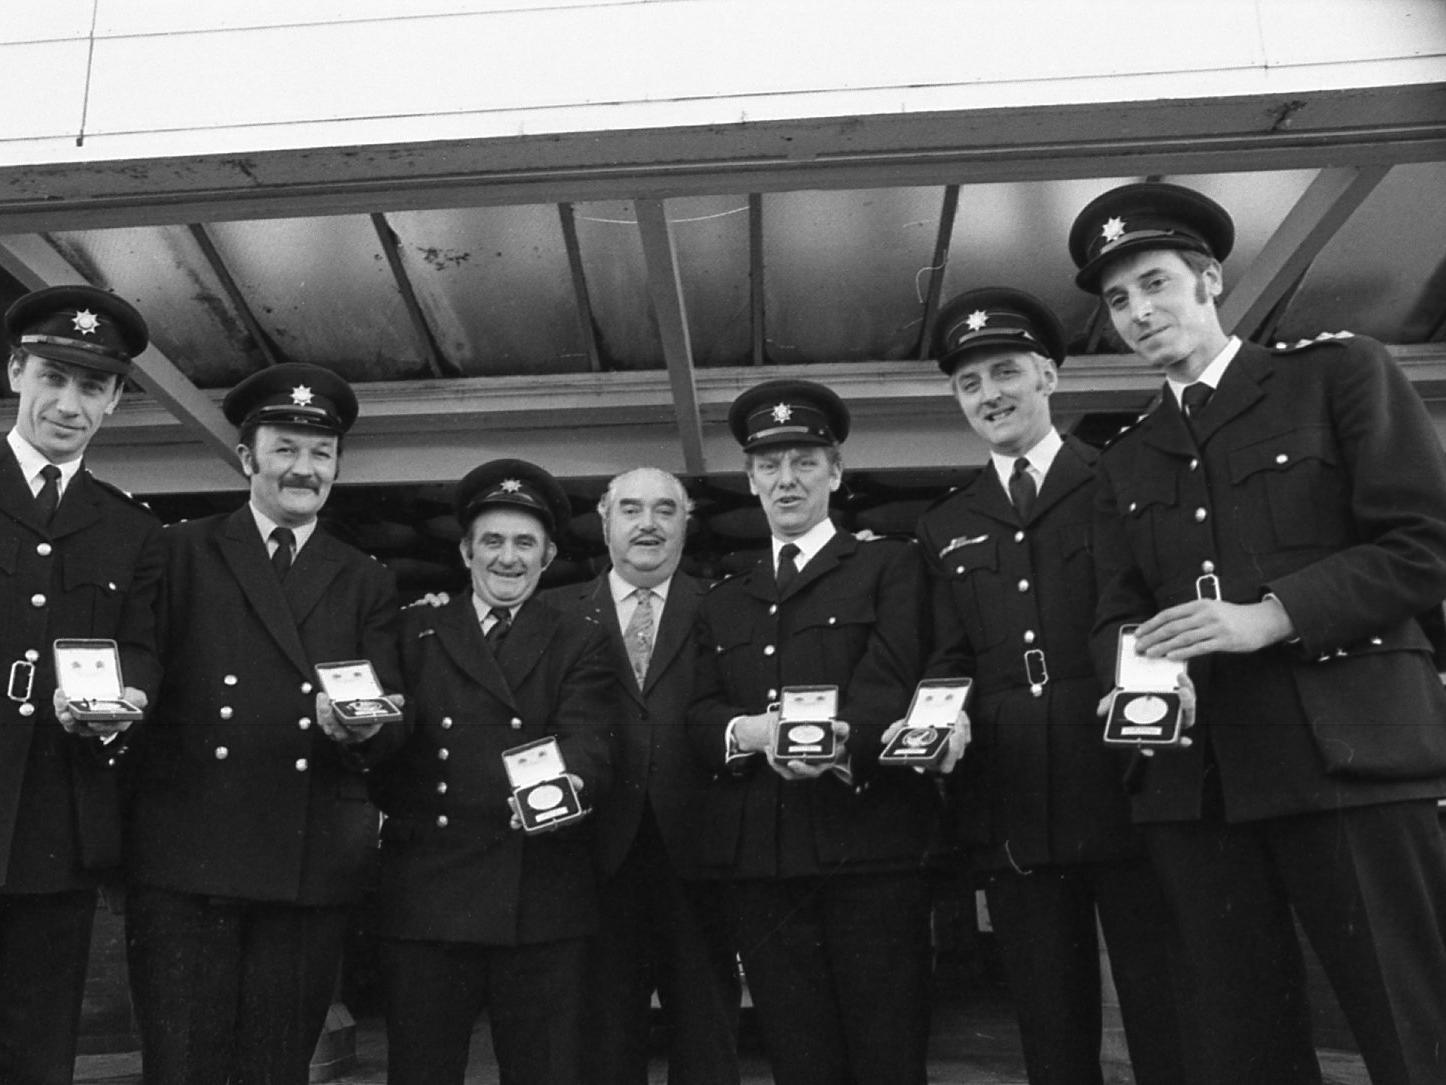 These firemen from St Annes are all holding a medal, They were presented with the accolades at the station on November 30.  What were the medals for?